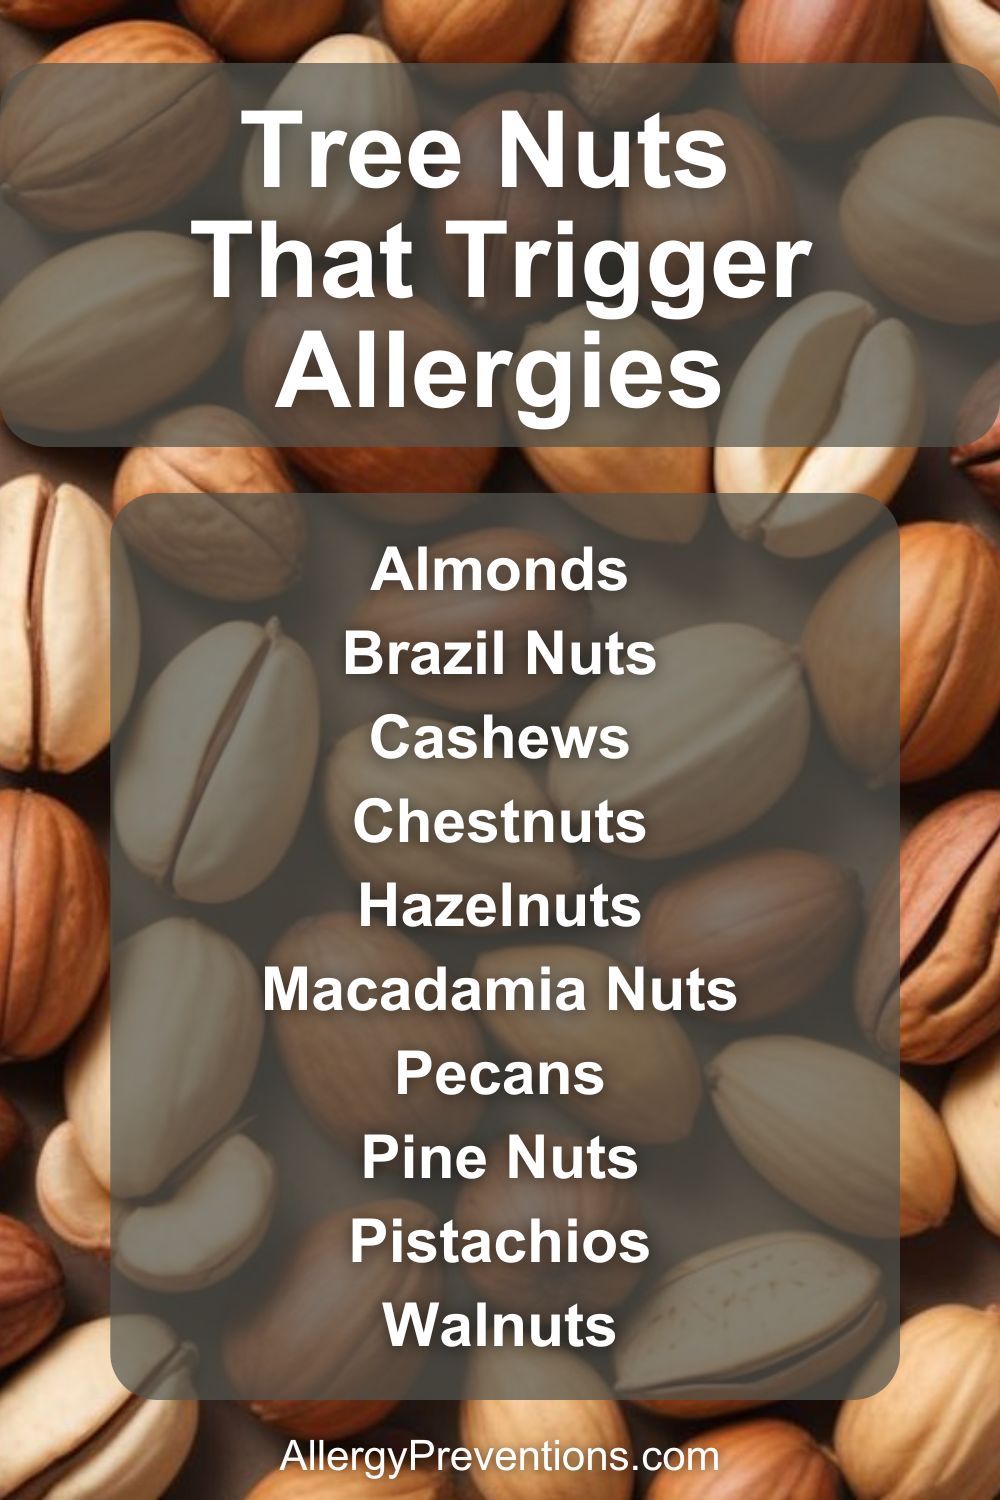 Tree nuts that trigger allergies infographic: Almonds, Brazil Nuts, Cashews, Chestnuts, Hazelnuts Macadamia Nuts, Pecans, Pine Nuts, Pistachios, and Walnuts.